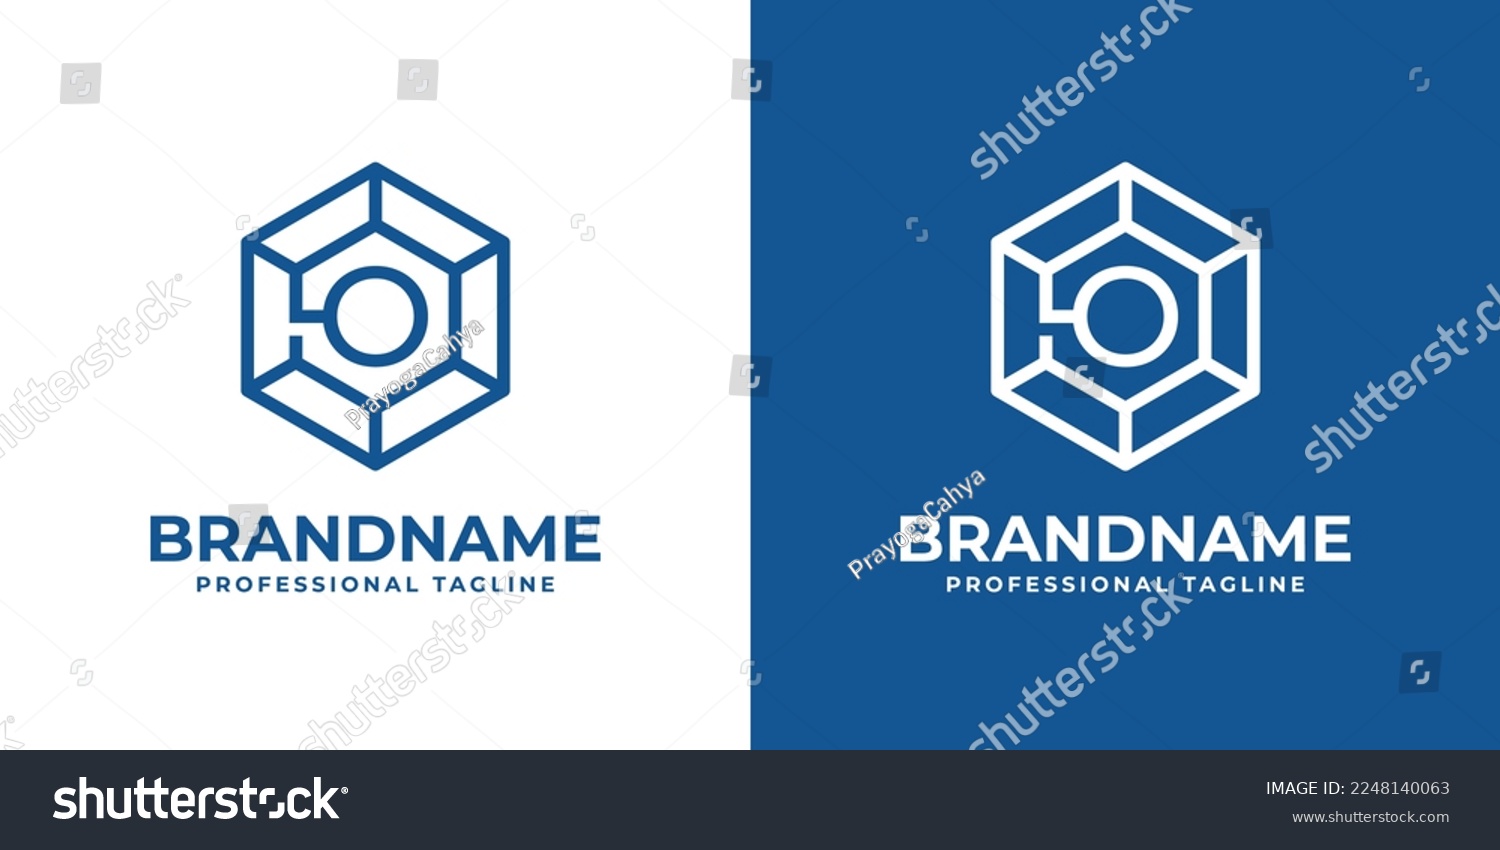 SVG of Initial O Hexagon Diamond Logo, suitable for any business with O initial. svg